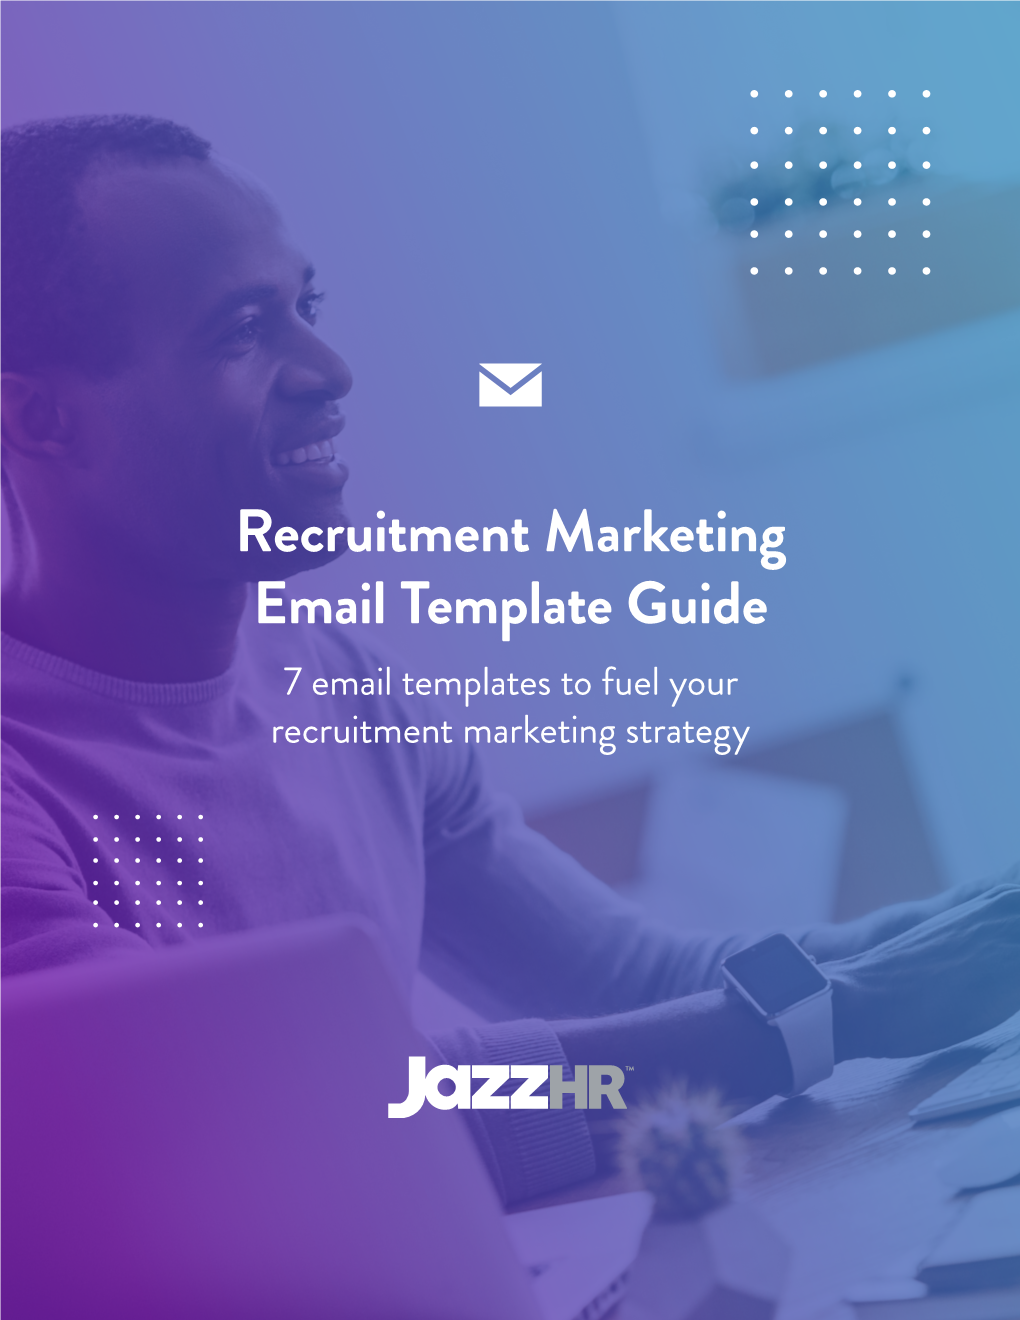 Recruitment Marketing Email Template Guide 7 Email Templates to Fuel Your Recruitment Marketing Strategy